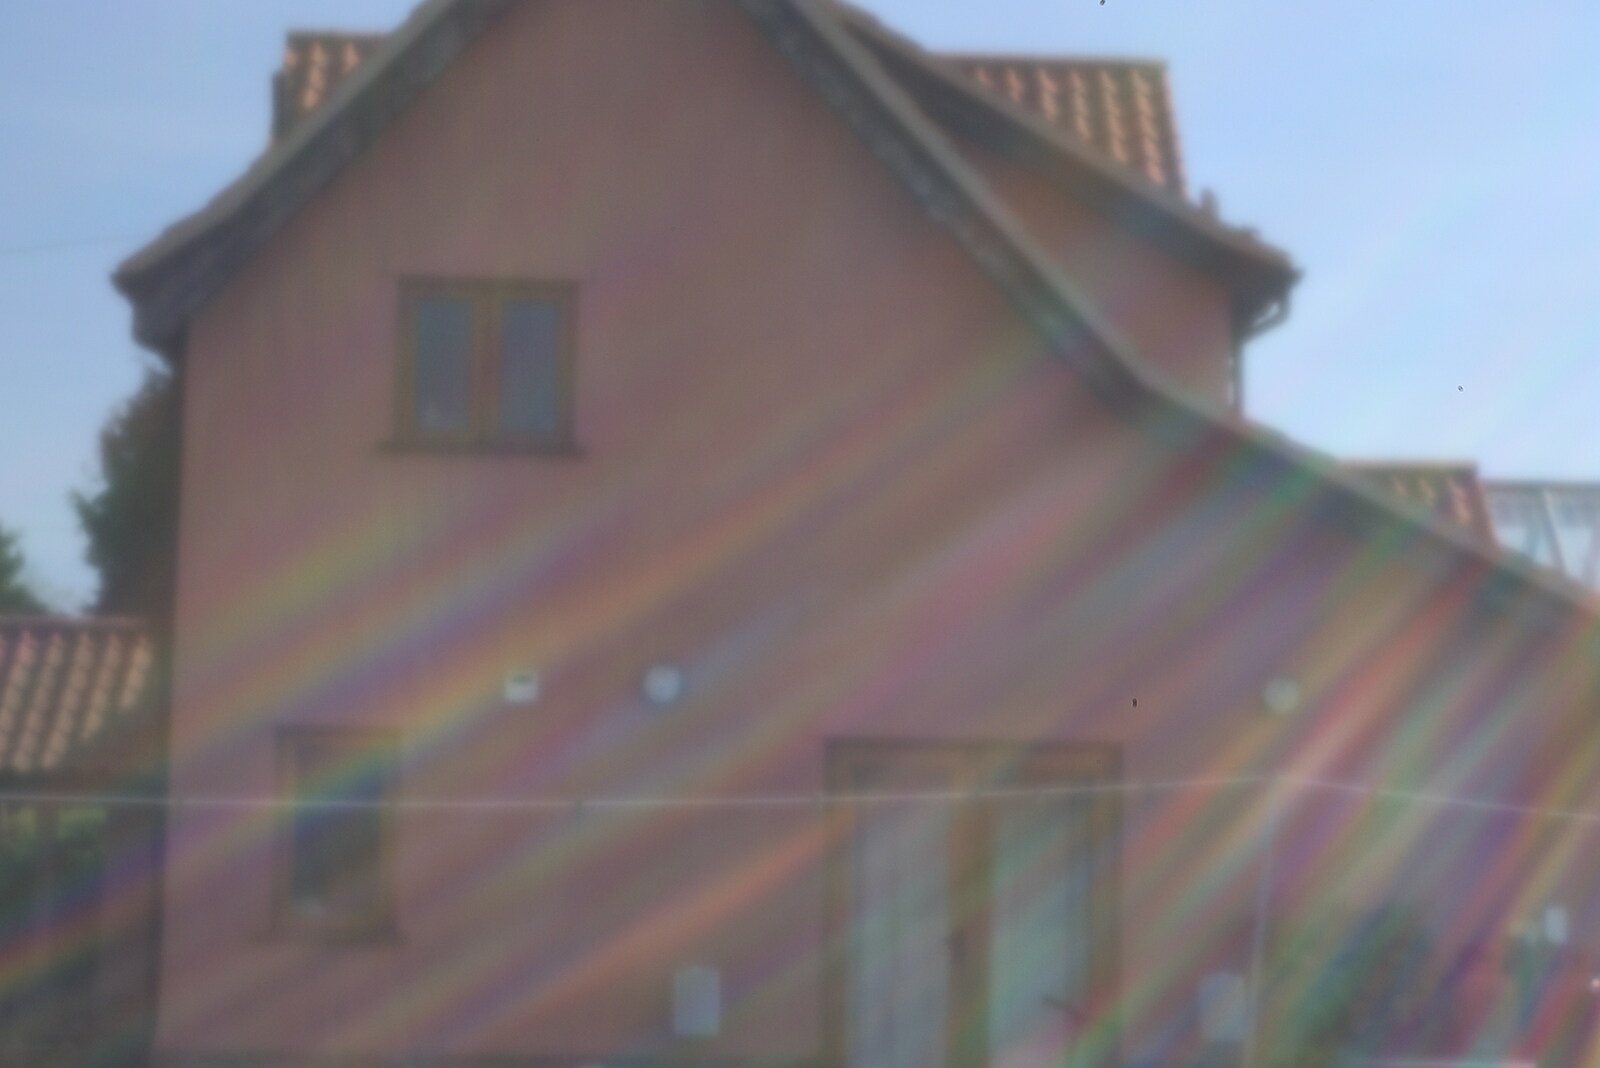 The house from Pin-hole Cameras and a Red Arrows Flypast, Brome, Suffolk - 8th May 2020